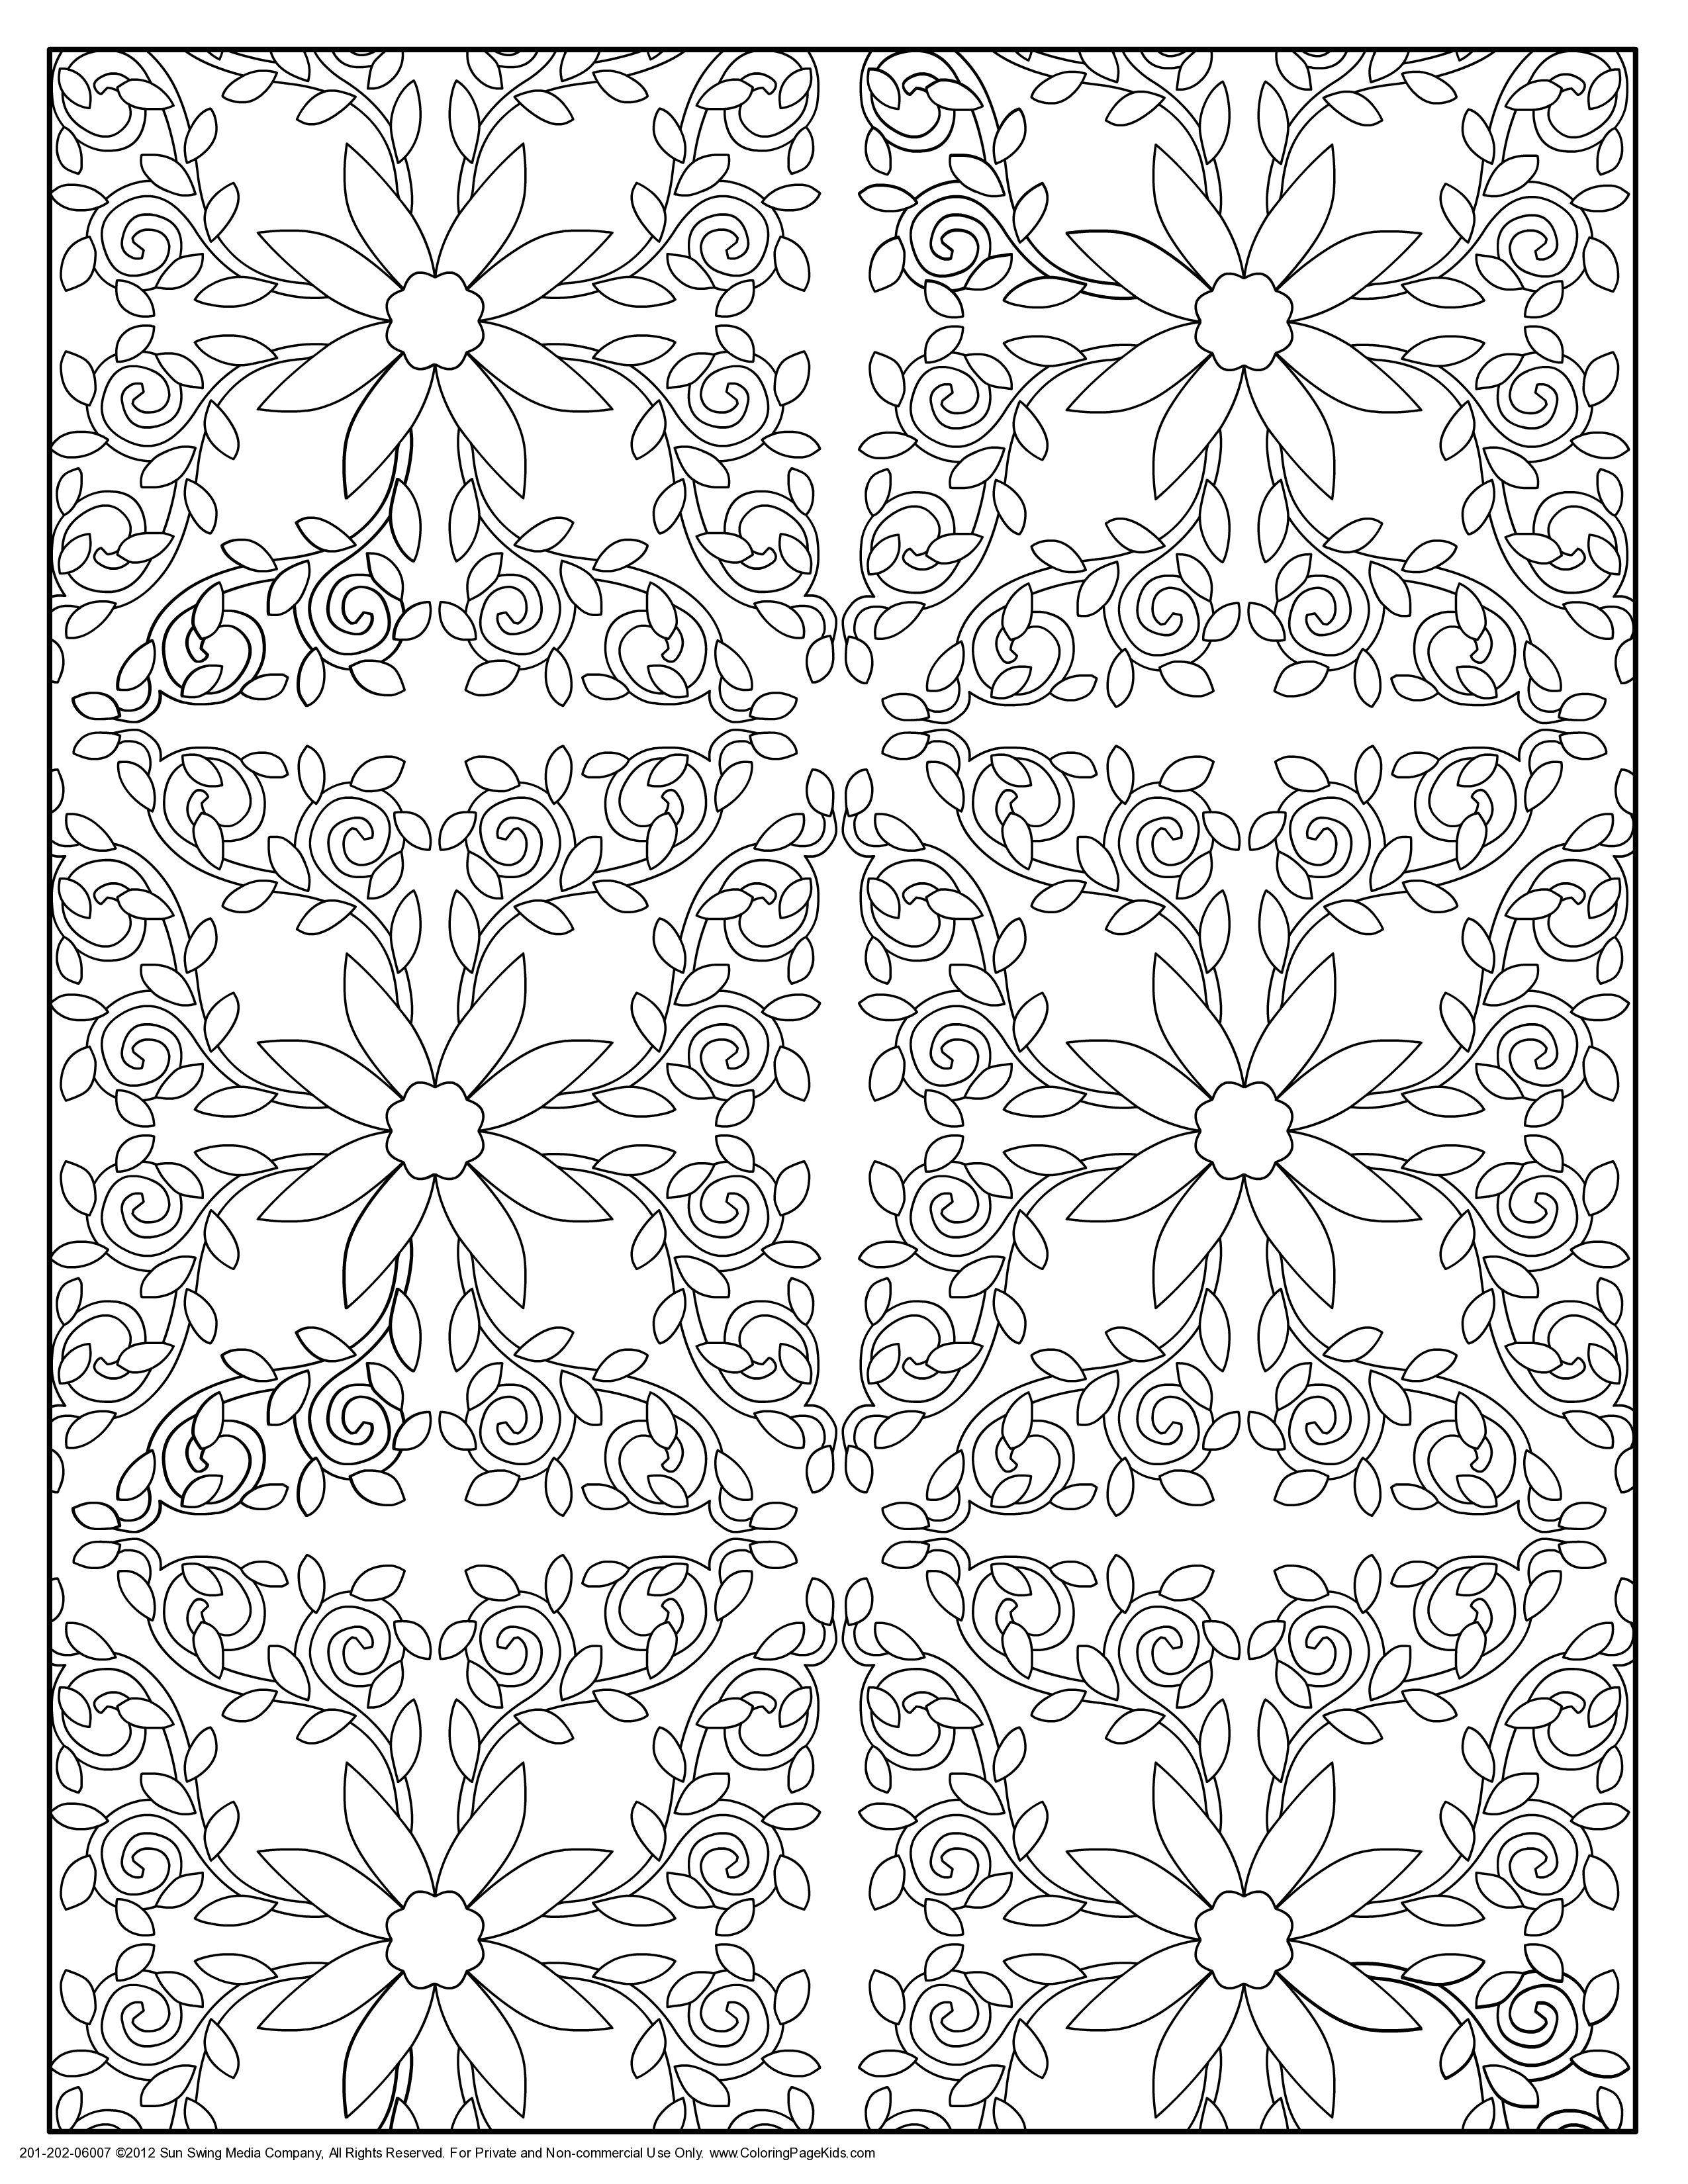 colouring pages patterns pattern coloring pages best coloring pages for kids patterns pages colouring 1 1